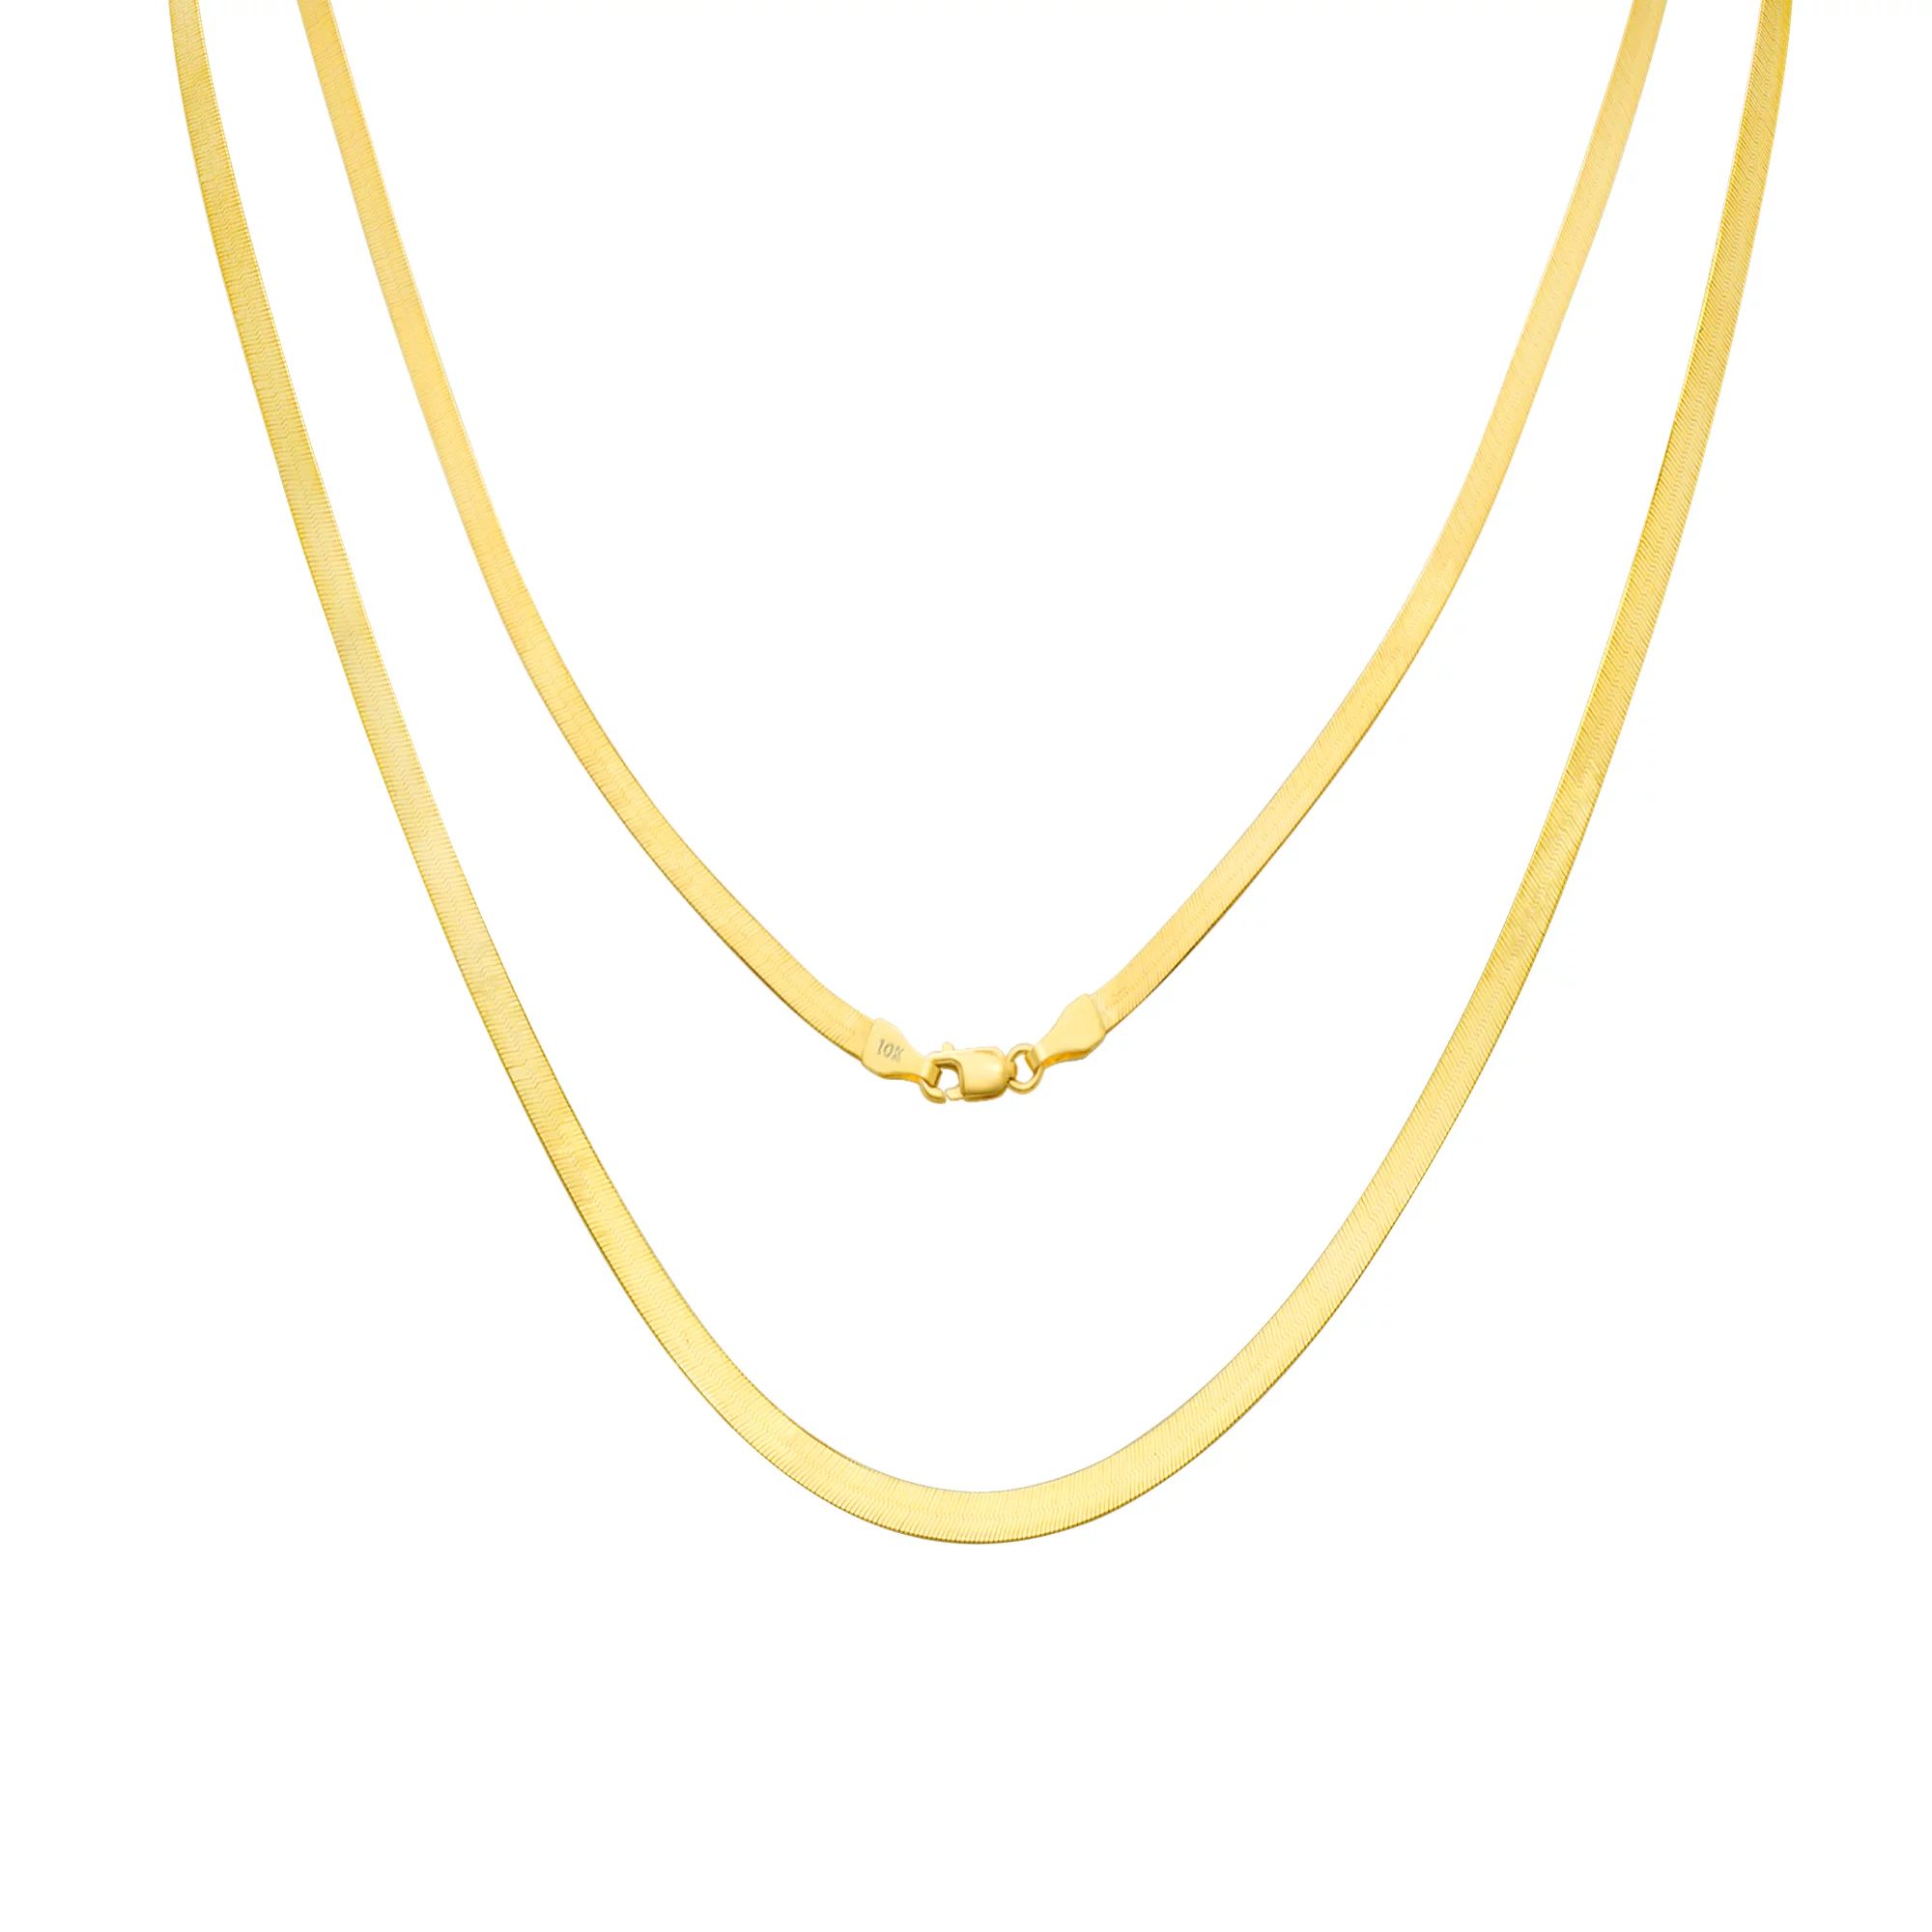 10K Yellow Gold Solid 3mm-9mm Polished Silky Flat Herringbone Chain Necklace, 16"- 30" | Walmart (US)